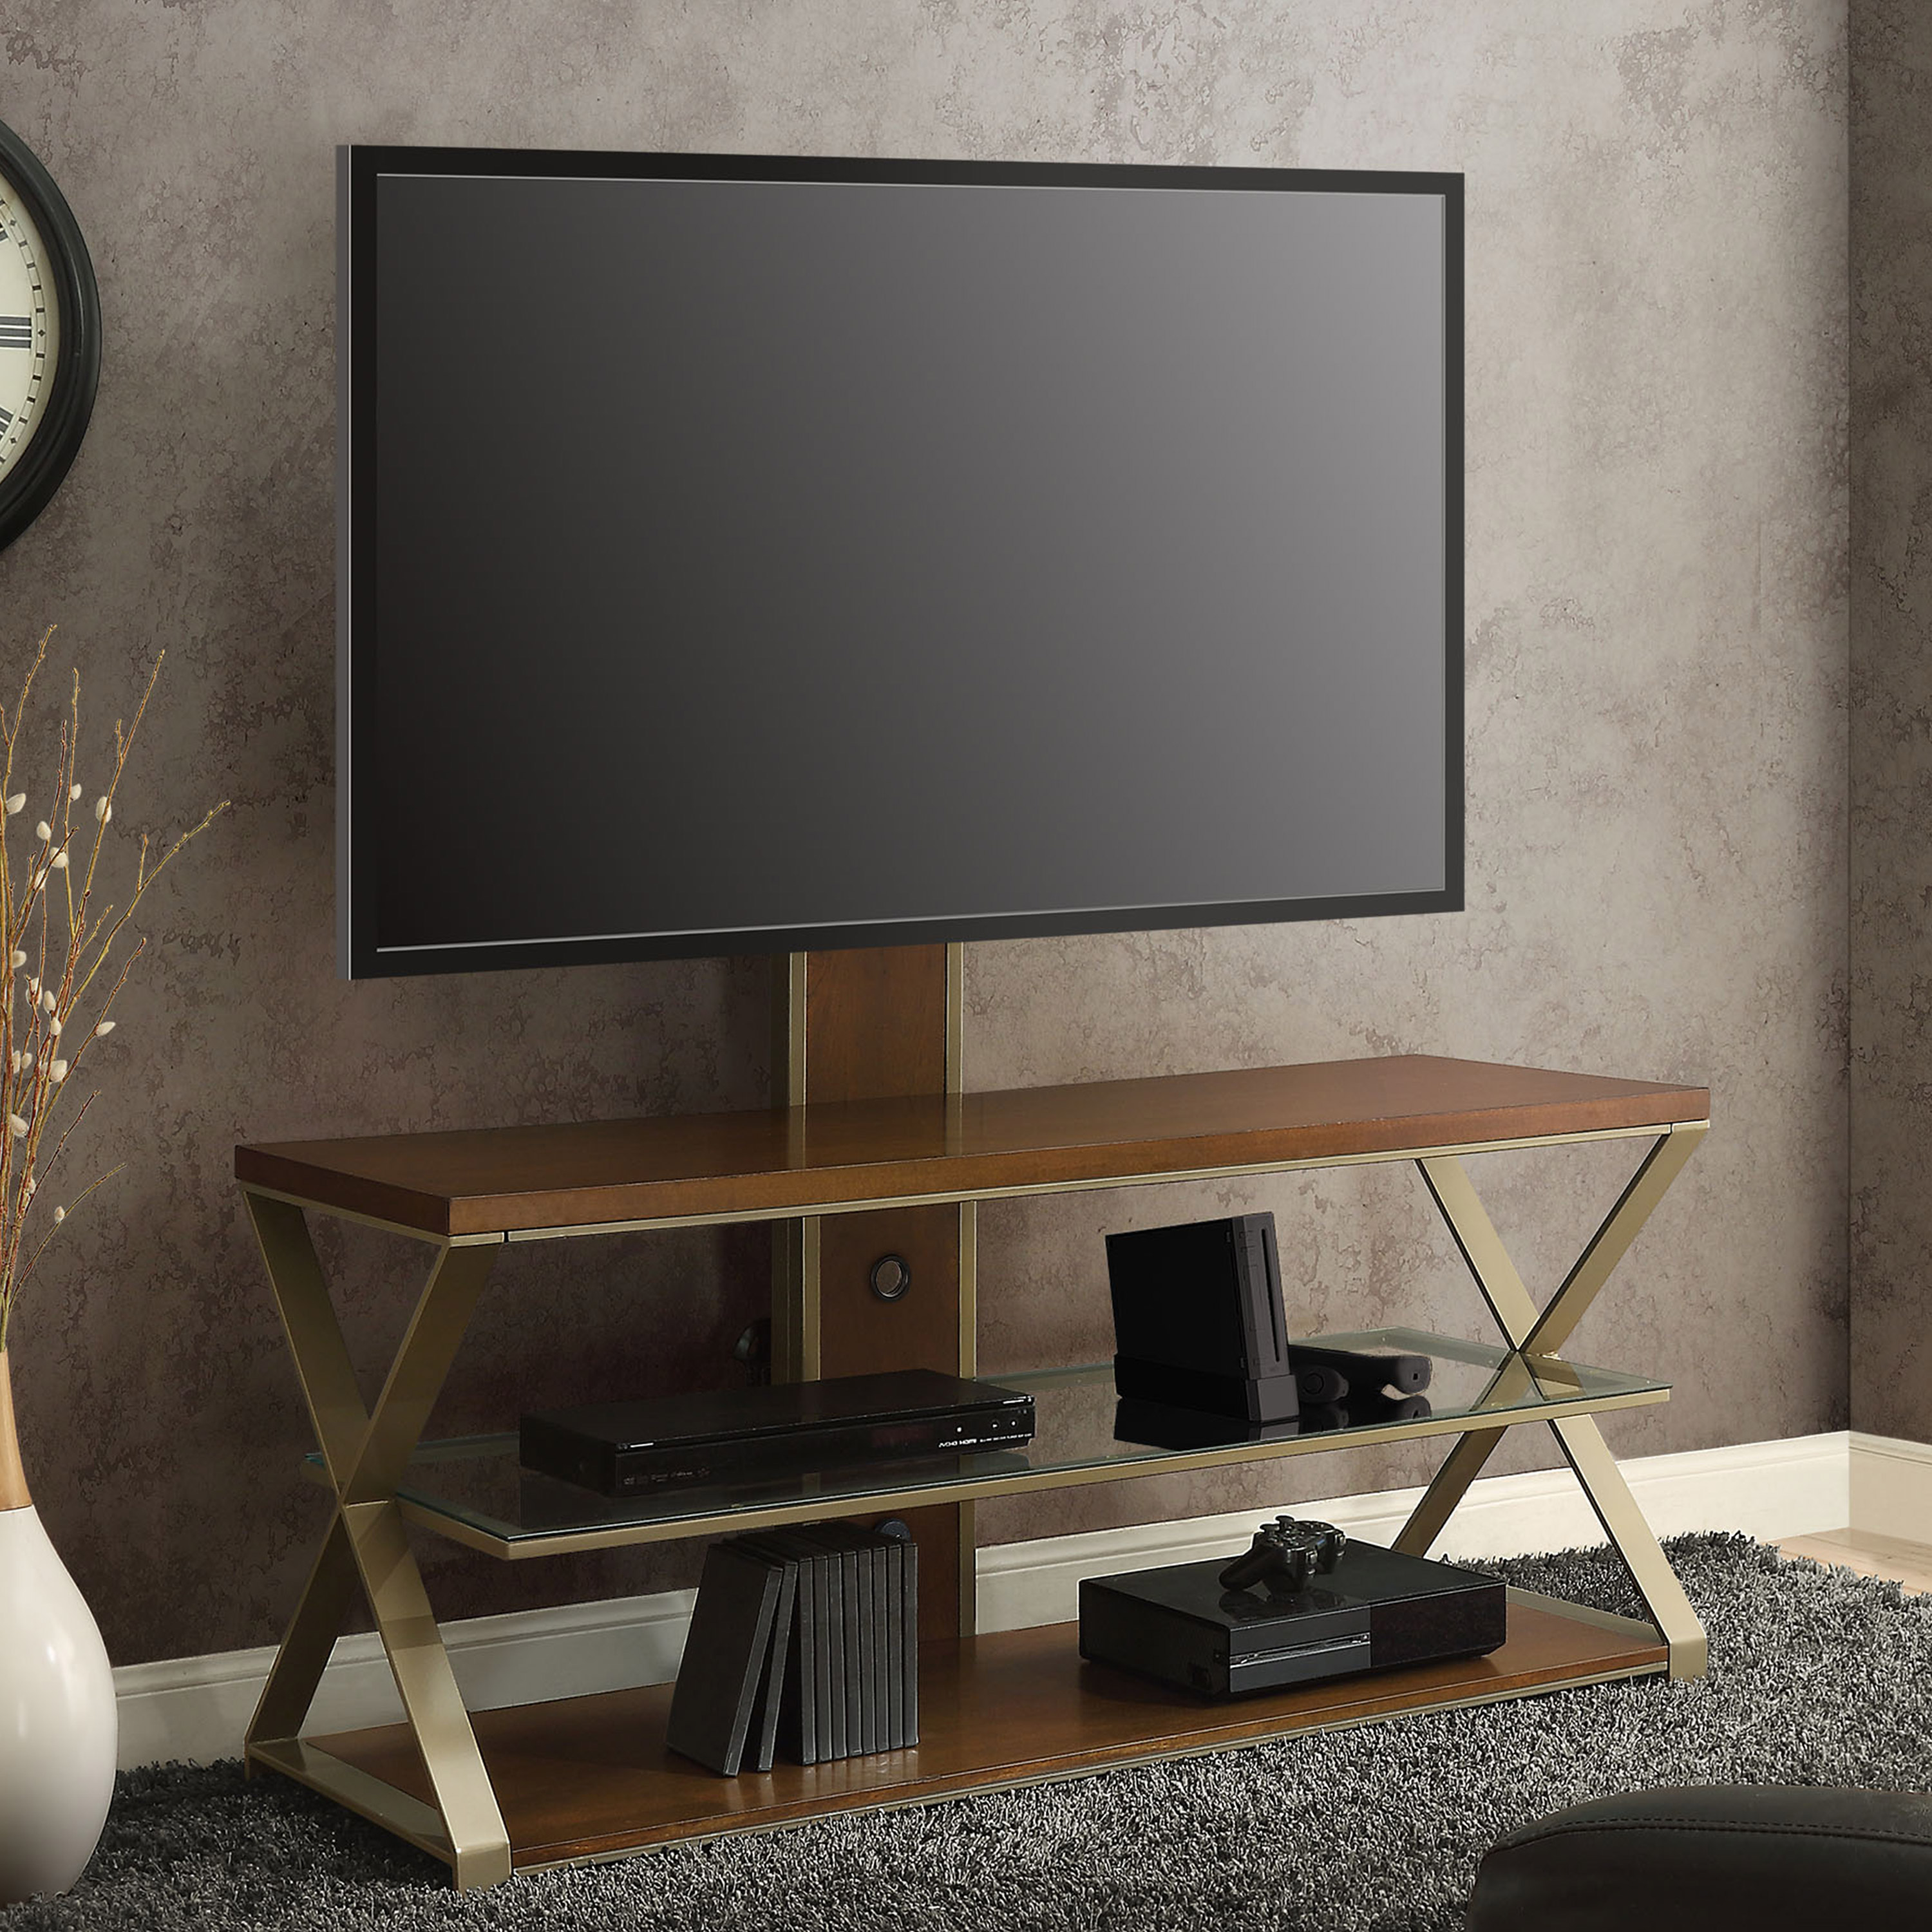 Jaxon 3-in-1 Television Stand for TVs up to 70″ with 3 Display Options for Flat Screens